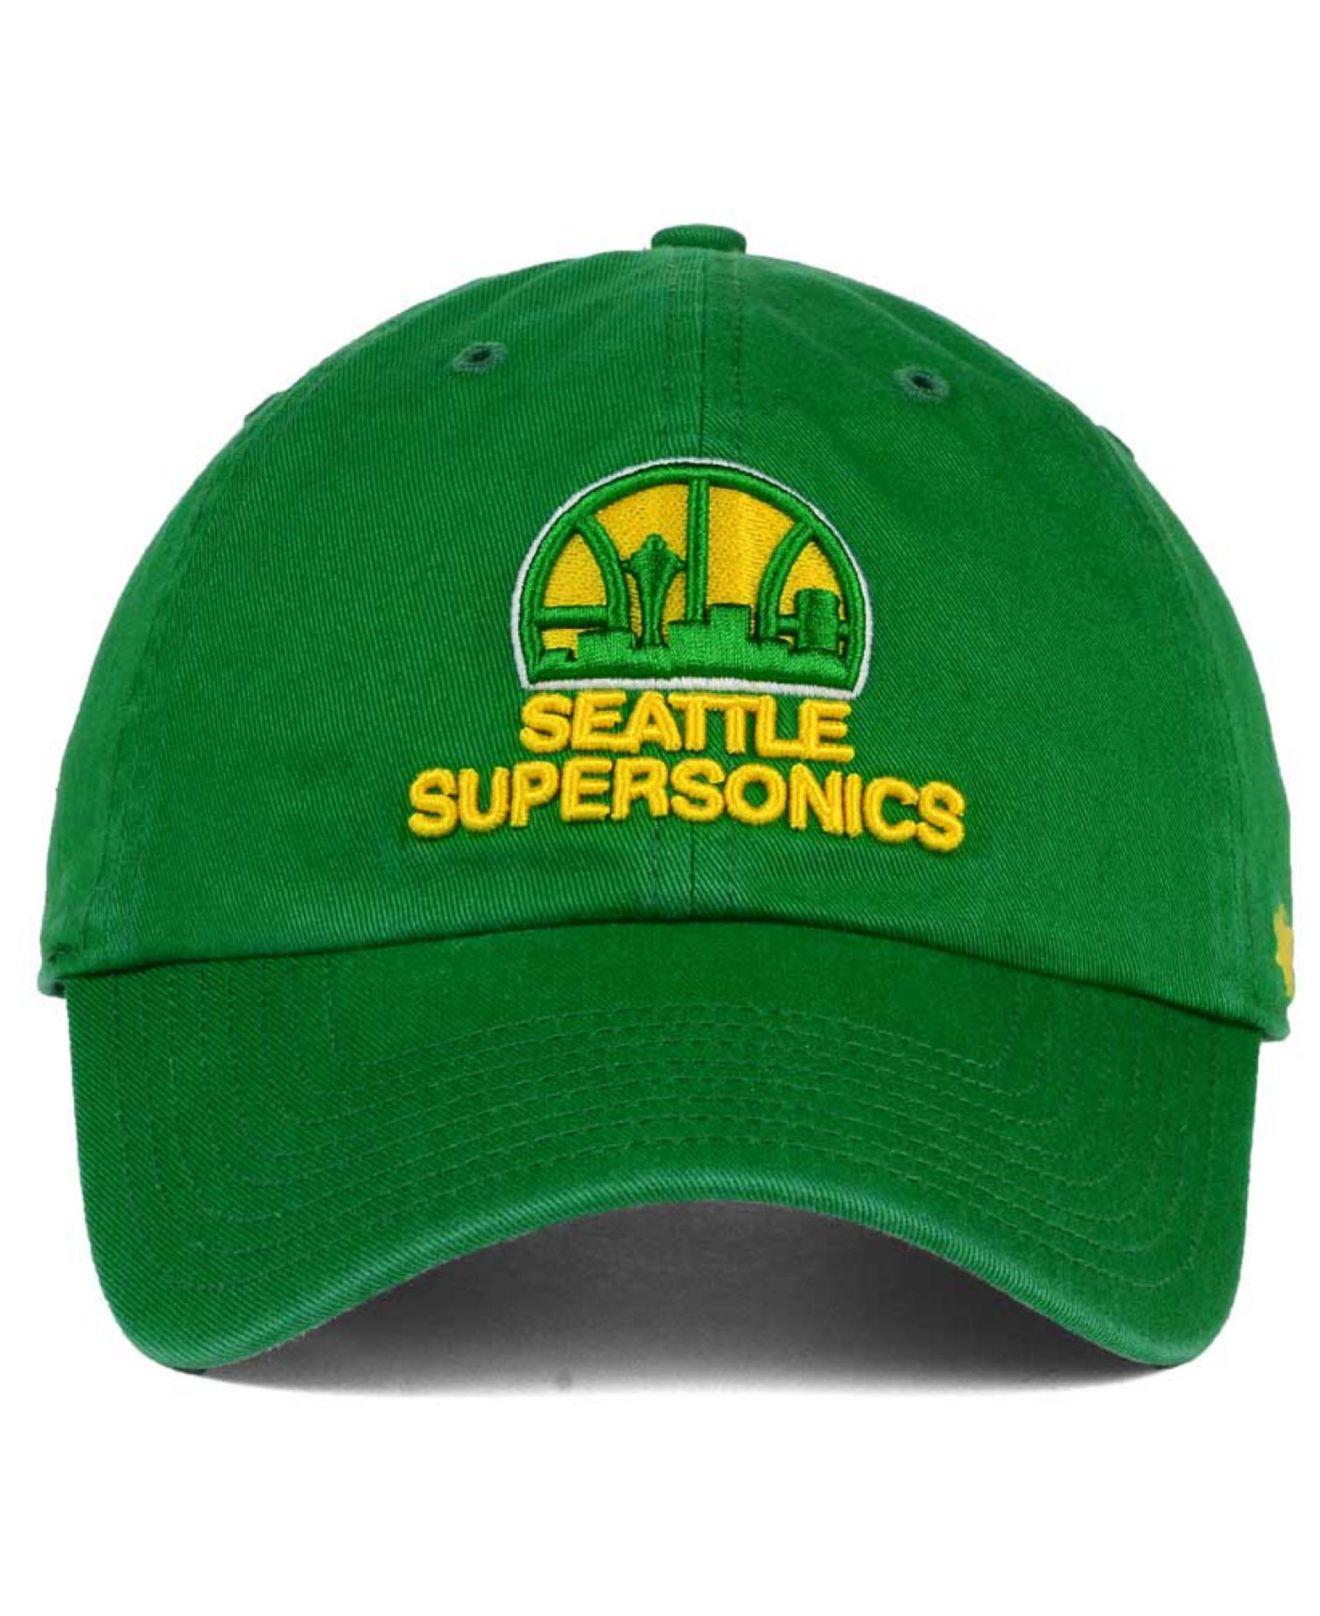 Seattle supersonics new era hat cap lime green fitted 7 1/2 men